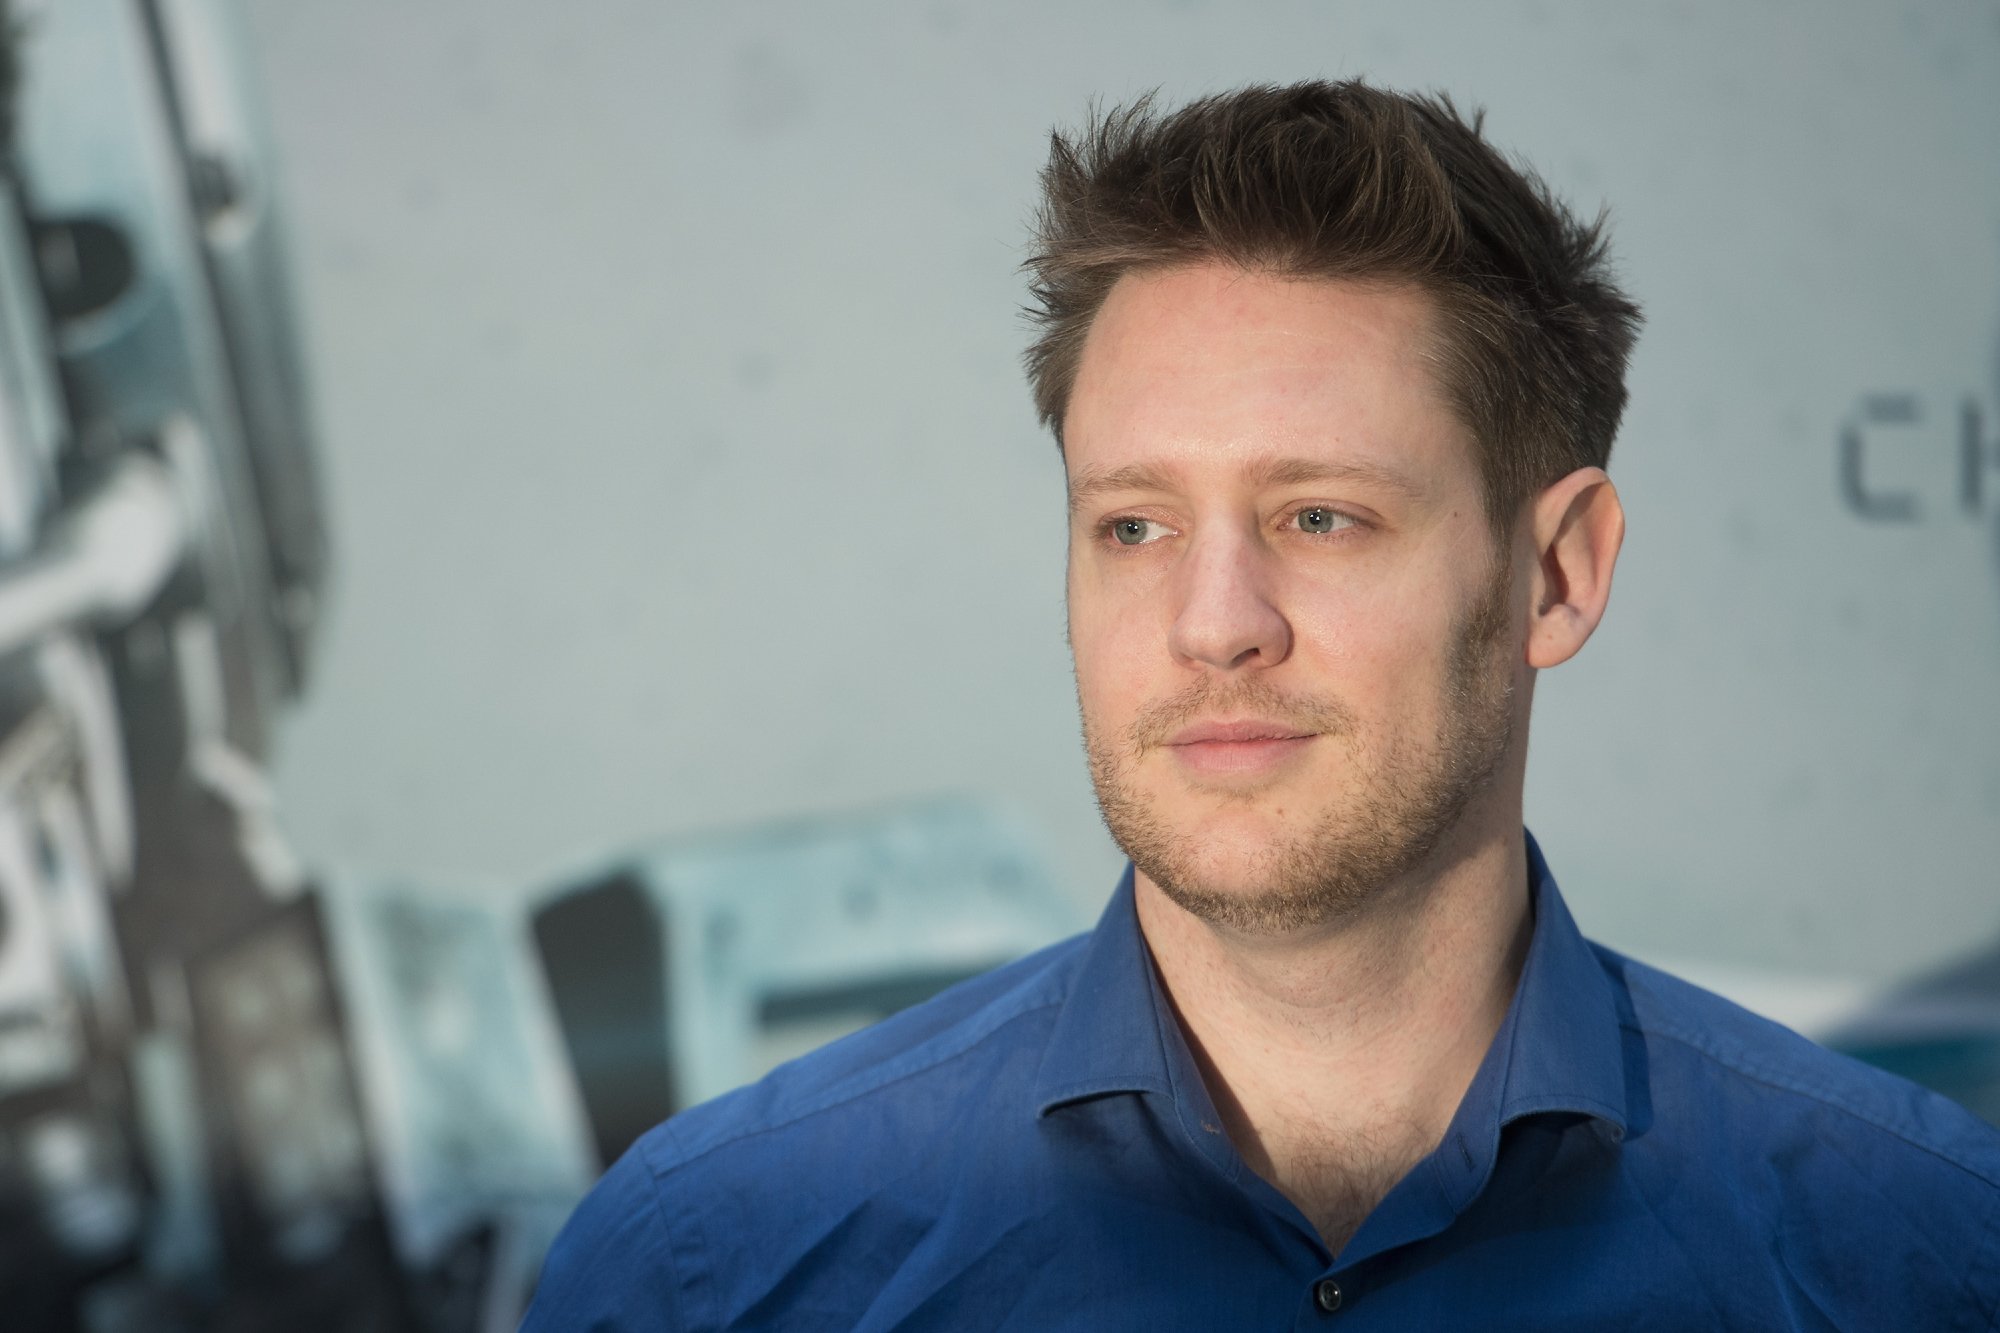 Neill Blomkamp attends a photo call for 'Chappie' in Berlin, Germany